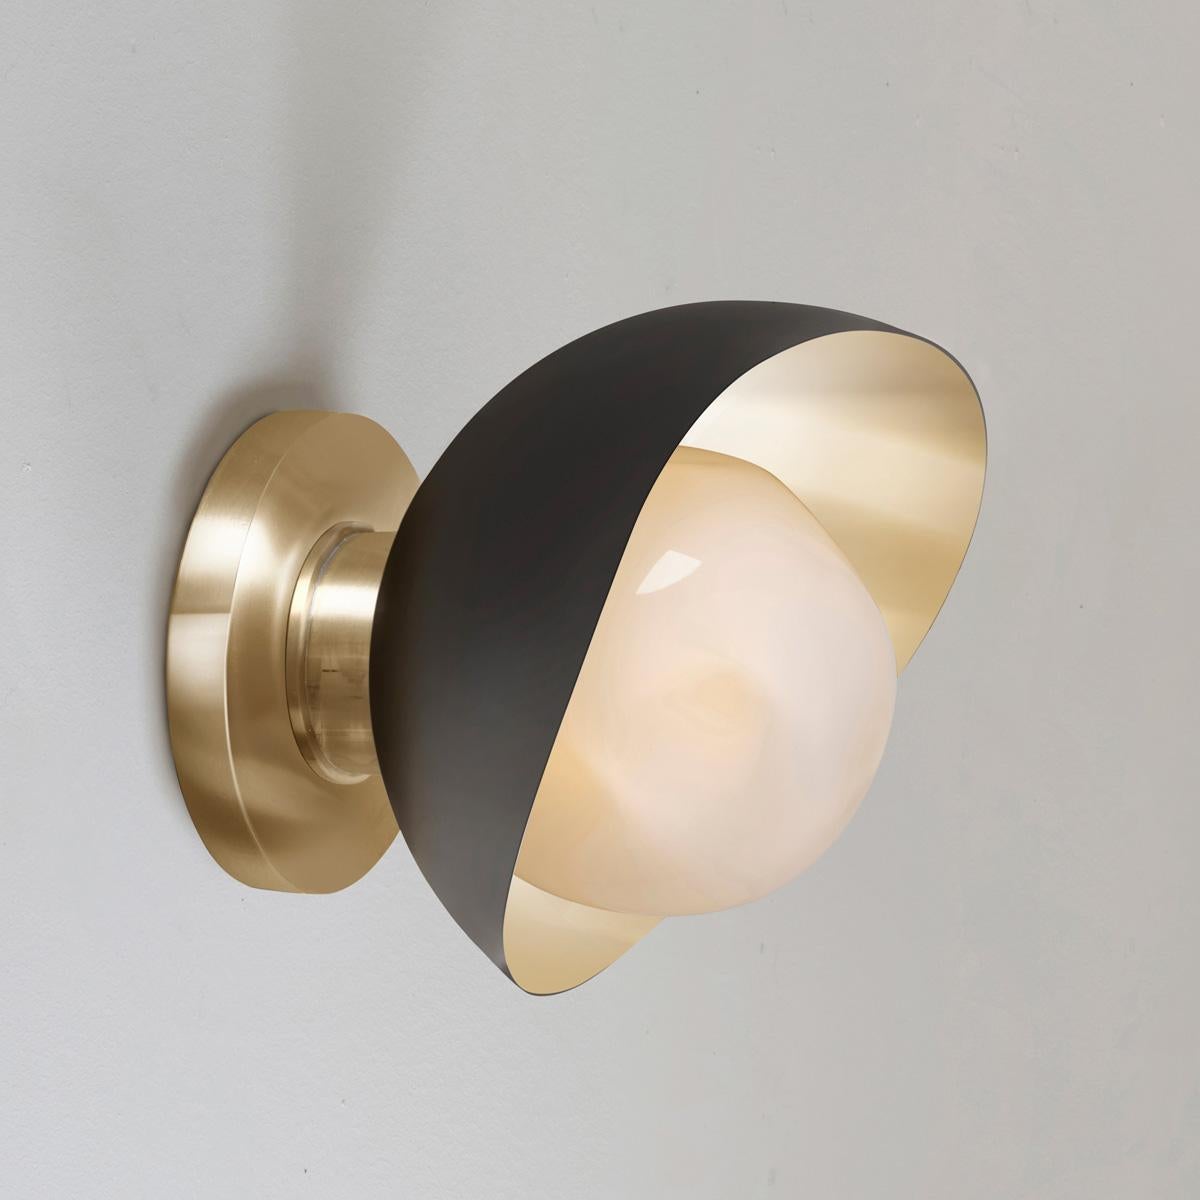 The Perla Mini wall light is the smallest member of the Perla collection featuring an organic brass shell nestling our Sfera glass handblown in Murano. See the Perla and Perla Grande for larger models.

The primary images shows it in black and